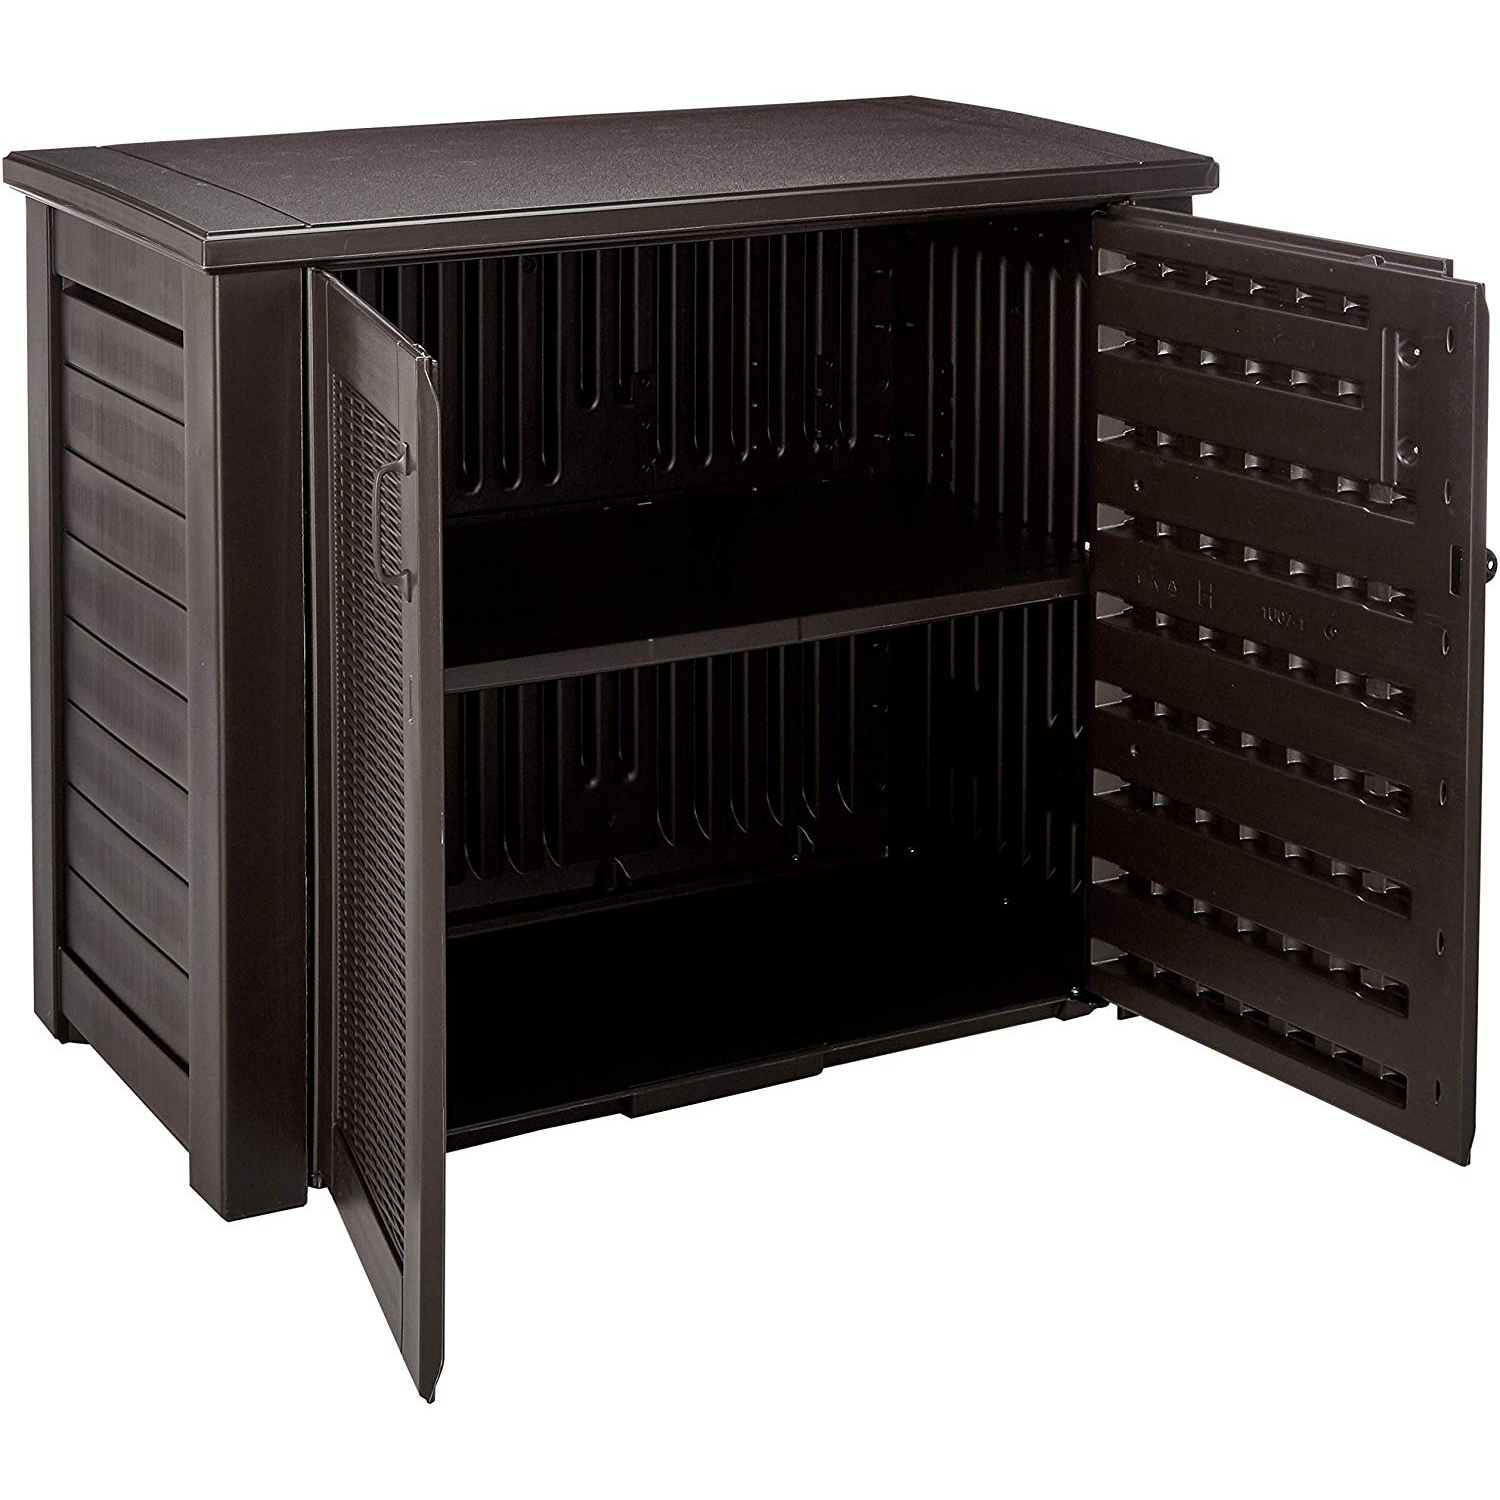 Rubbermaid Weather Resistant Resin Chic, Rubbermaid Outdoor Storage Cabinet Shelves